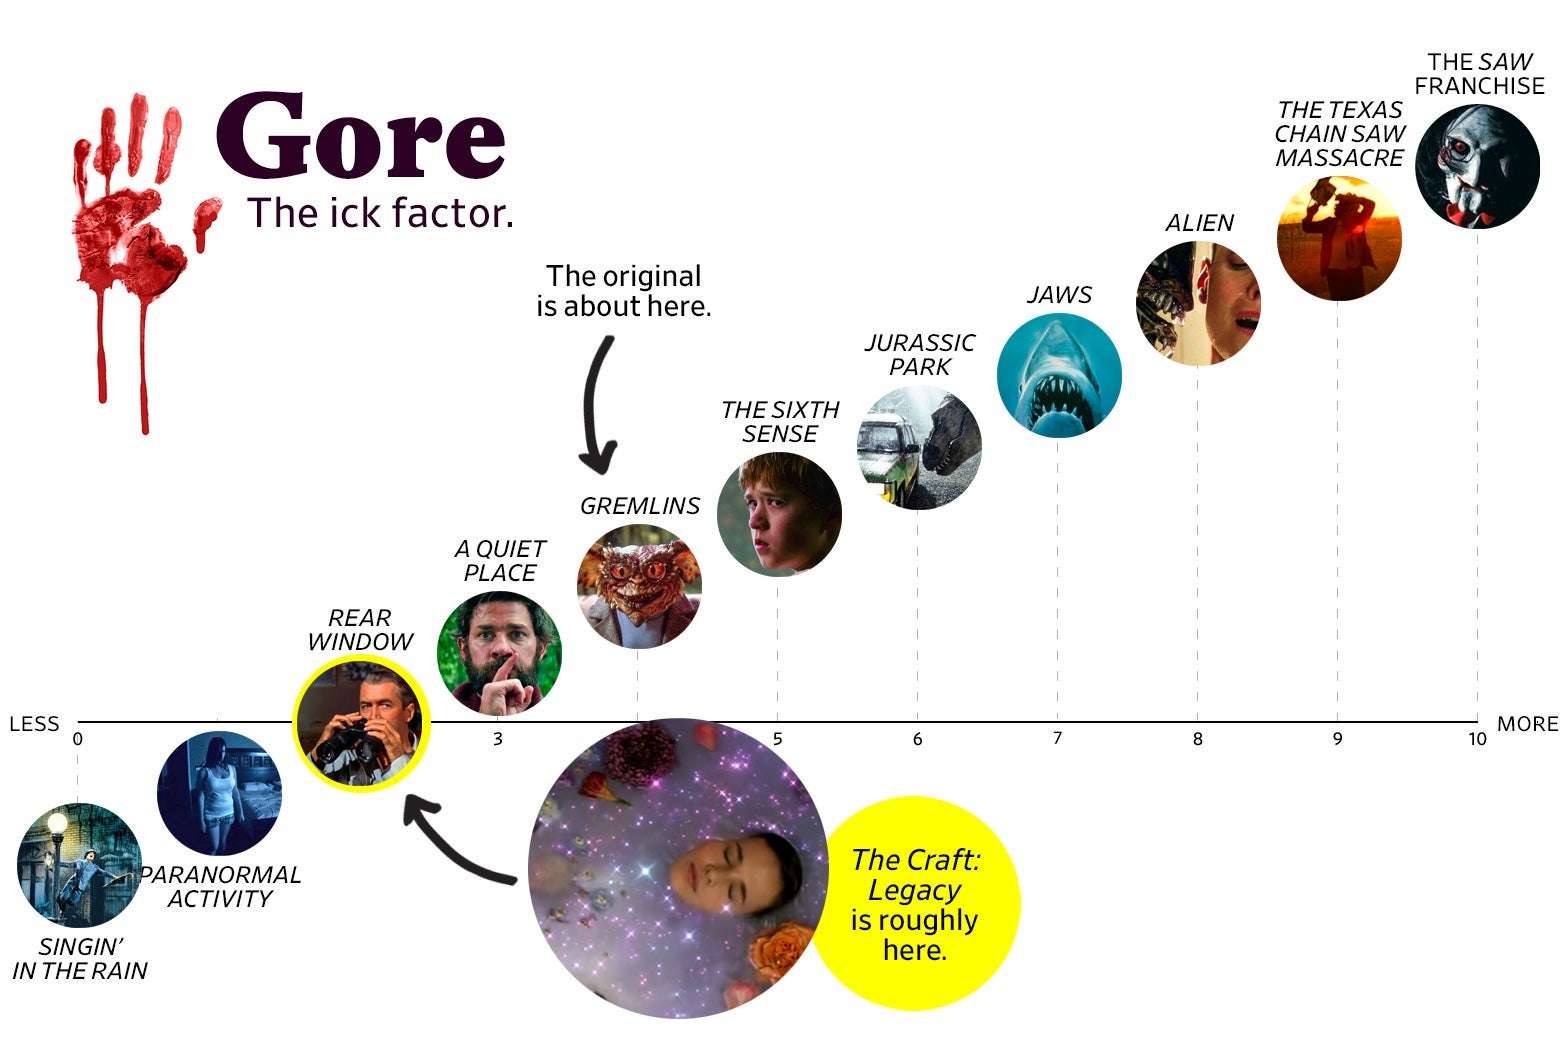 A chart titled “Gore: the Ick Factor” shows that The Craft: Legacy ranks a 2 in goriness, roughly the same as Rear Window, while the original ranks a 4, roughly the same as Gremlins. The scale ranges from Singin’ in the Rain (0) to the Saw franchise (10).